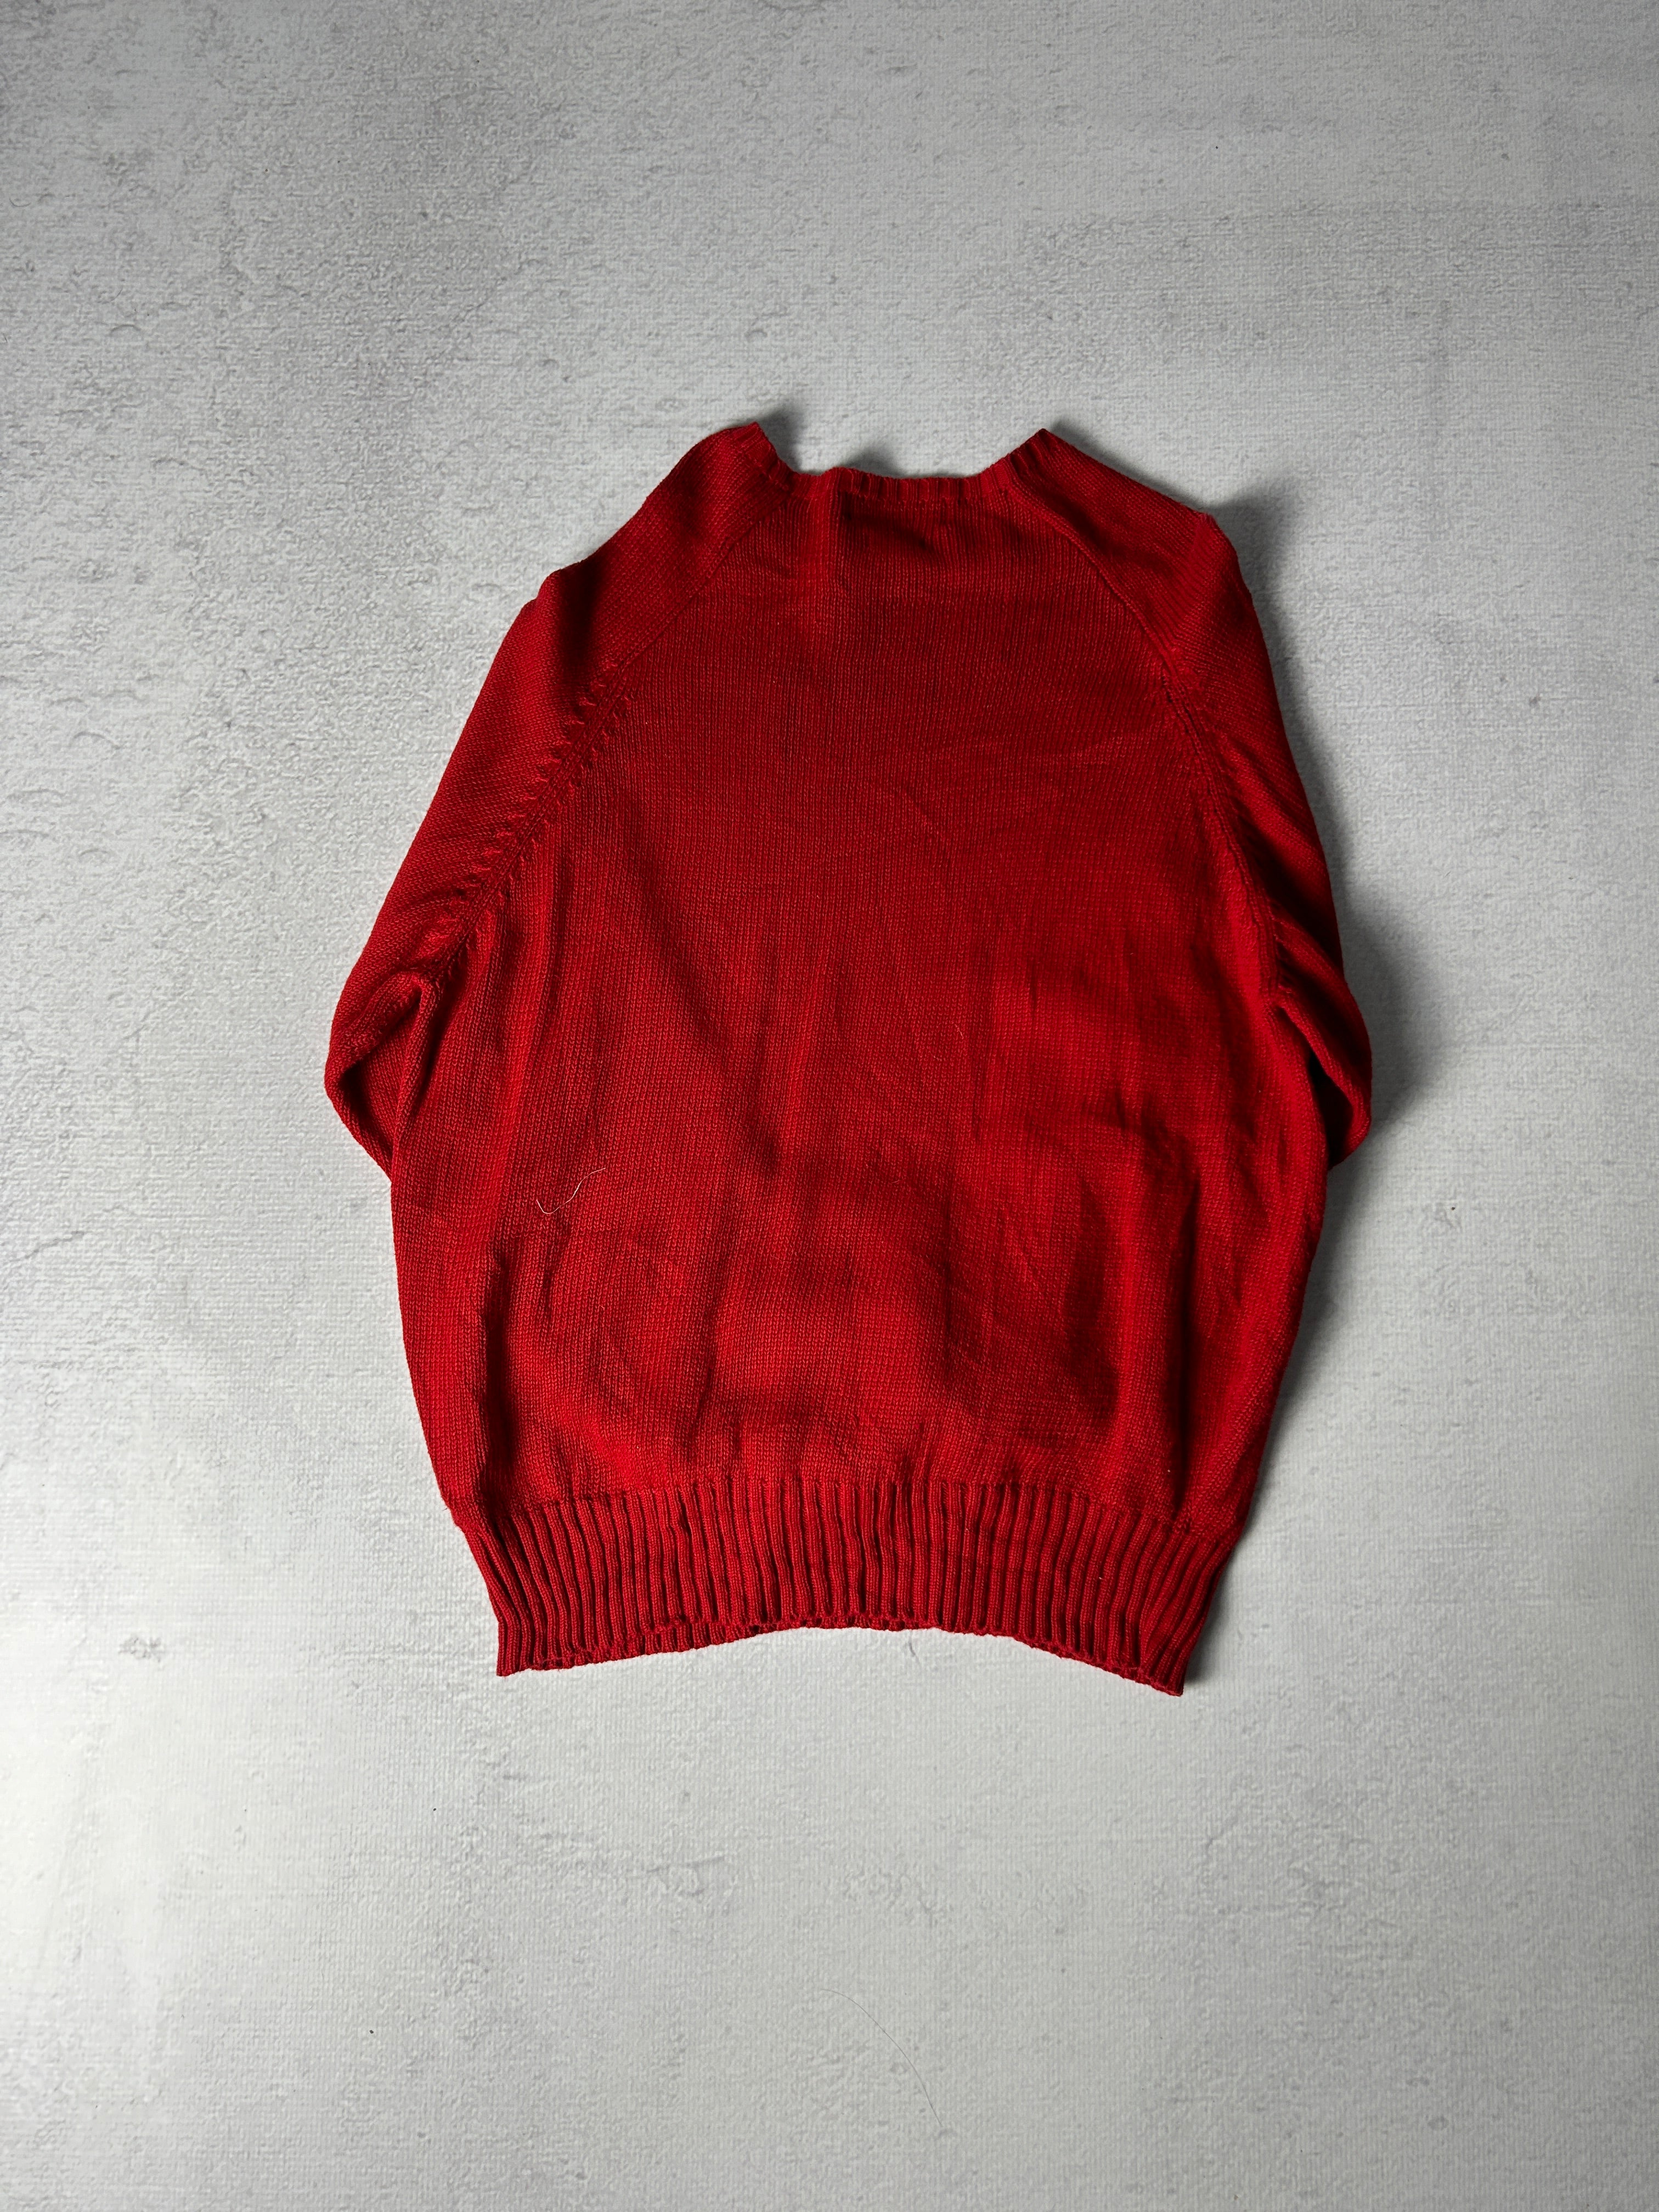 Vintage Polo Ralph Lauren Knitted Sweater - Men's Large